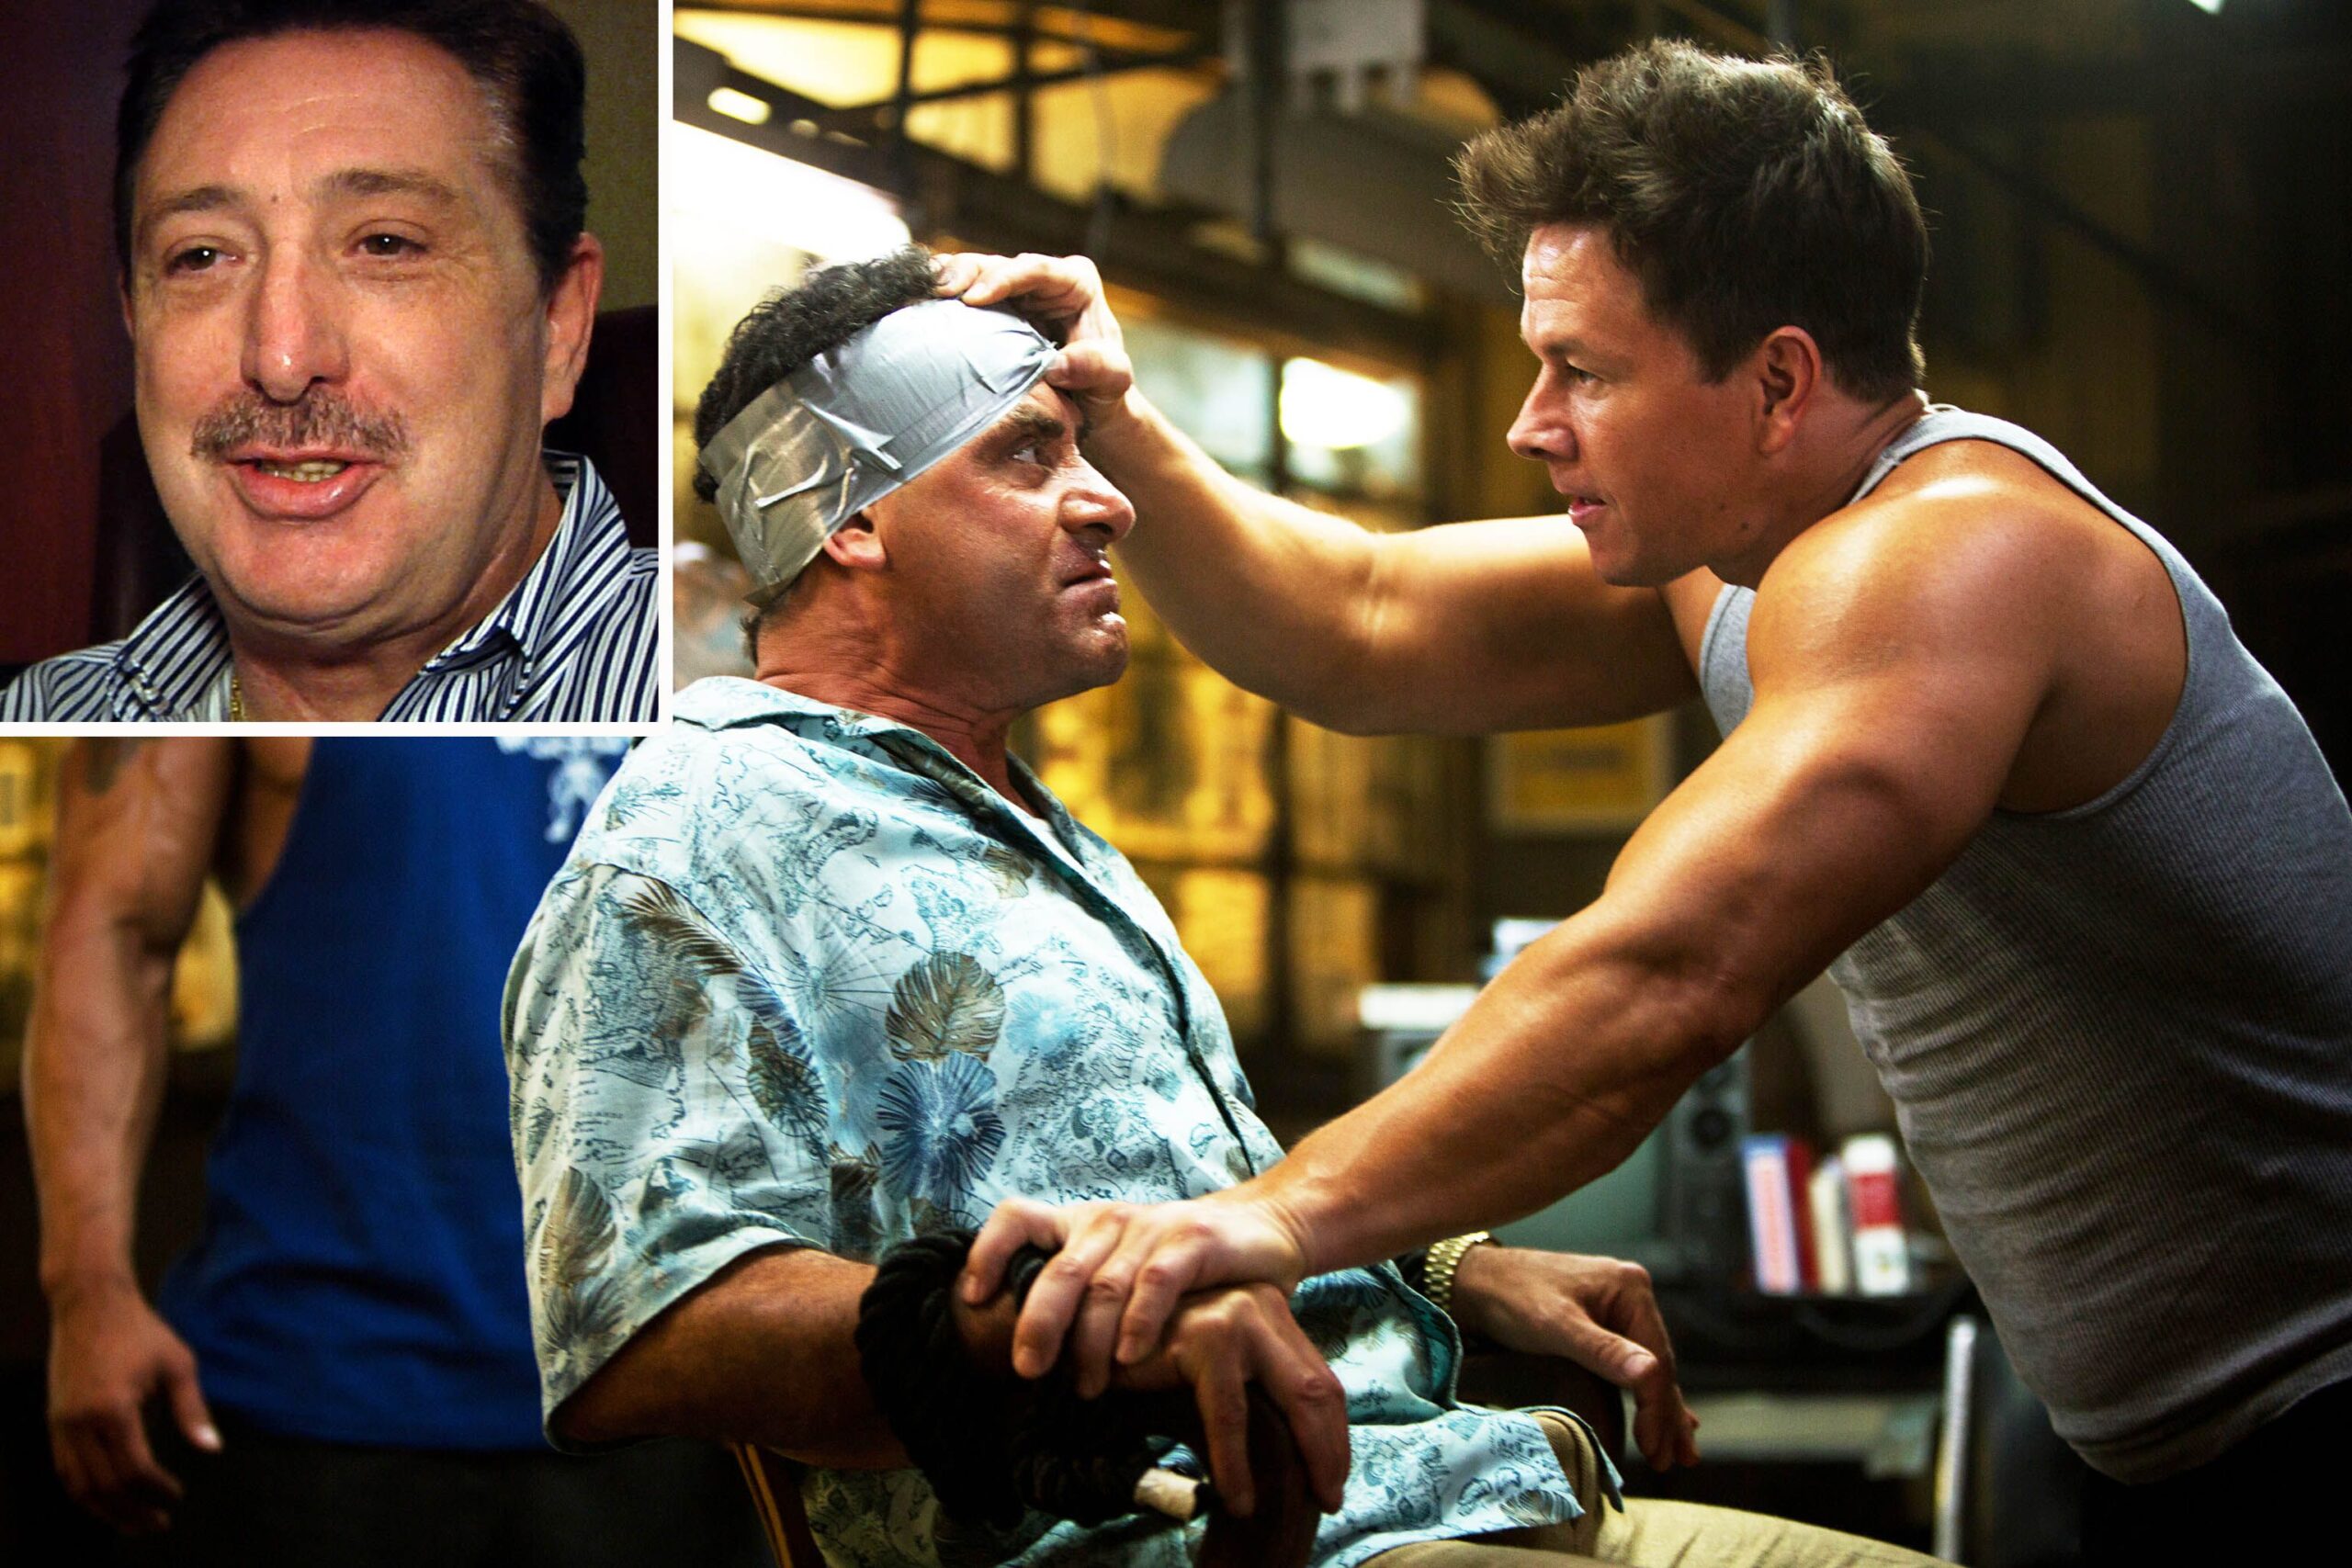 Pain And Gain True Story Is Based On An Actual Life Kidnapping